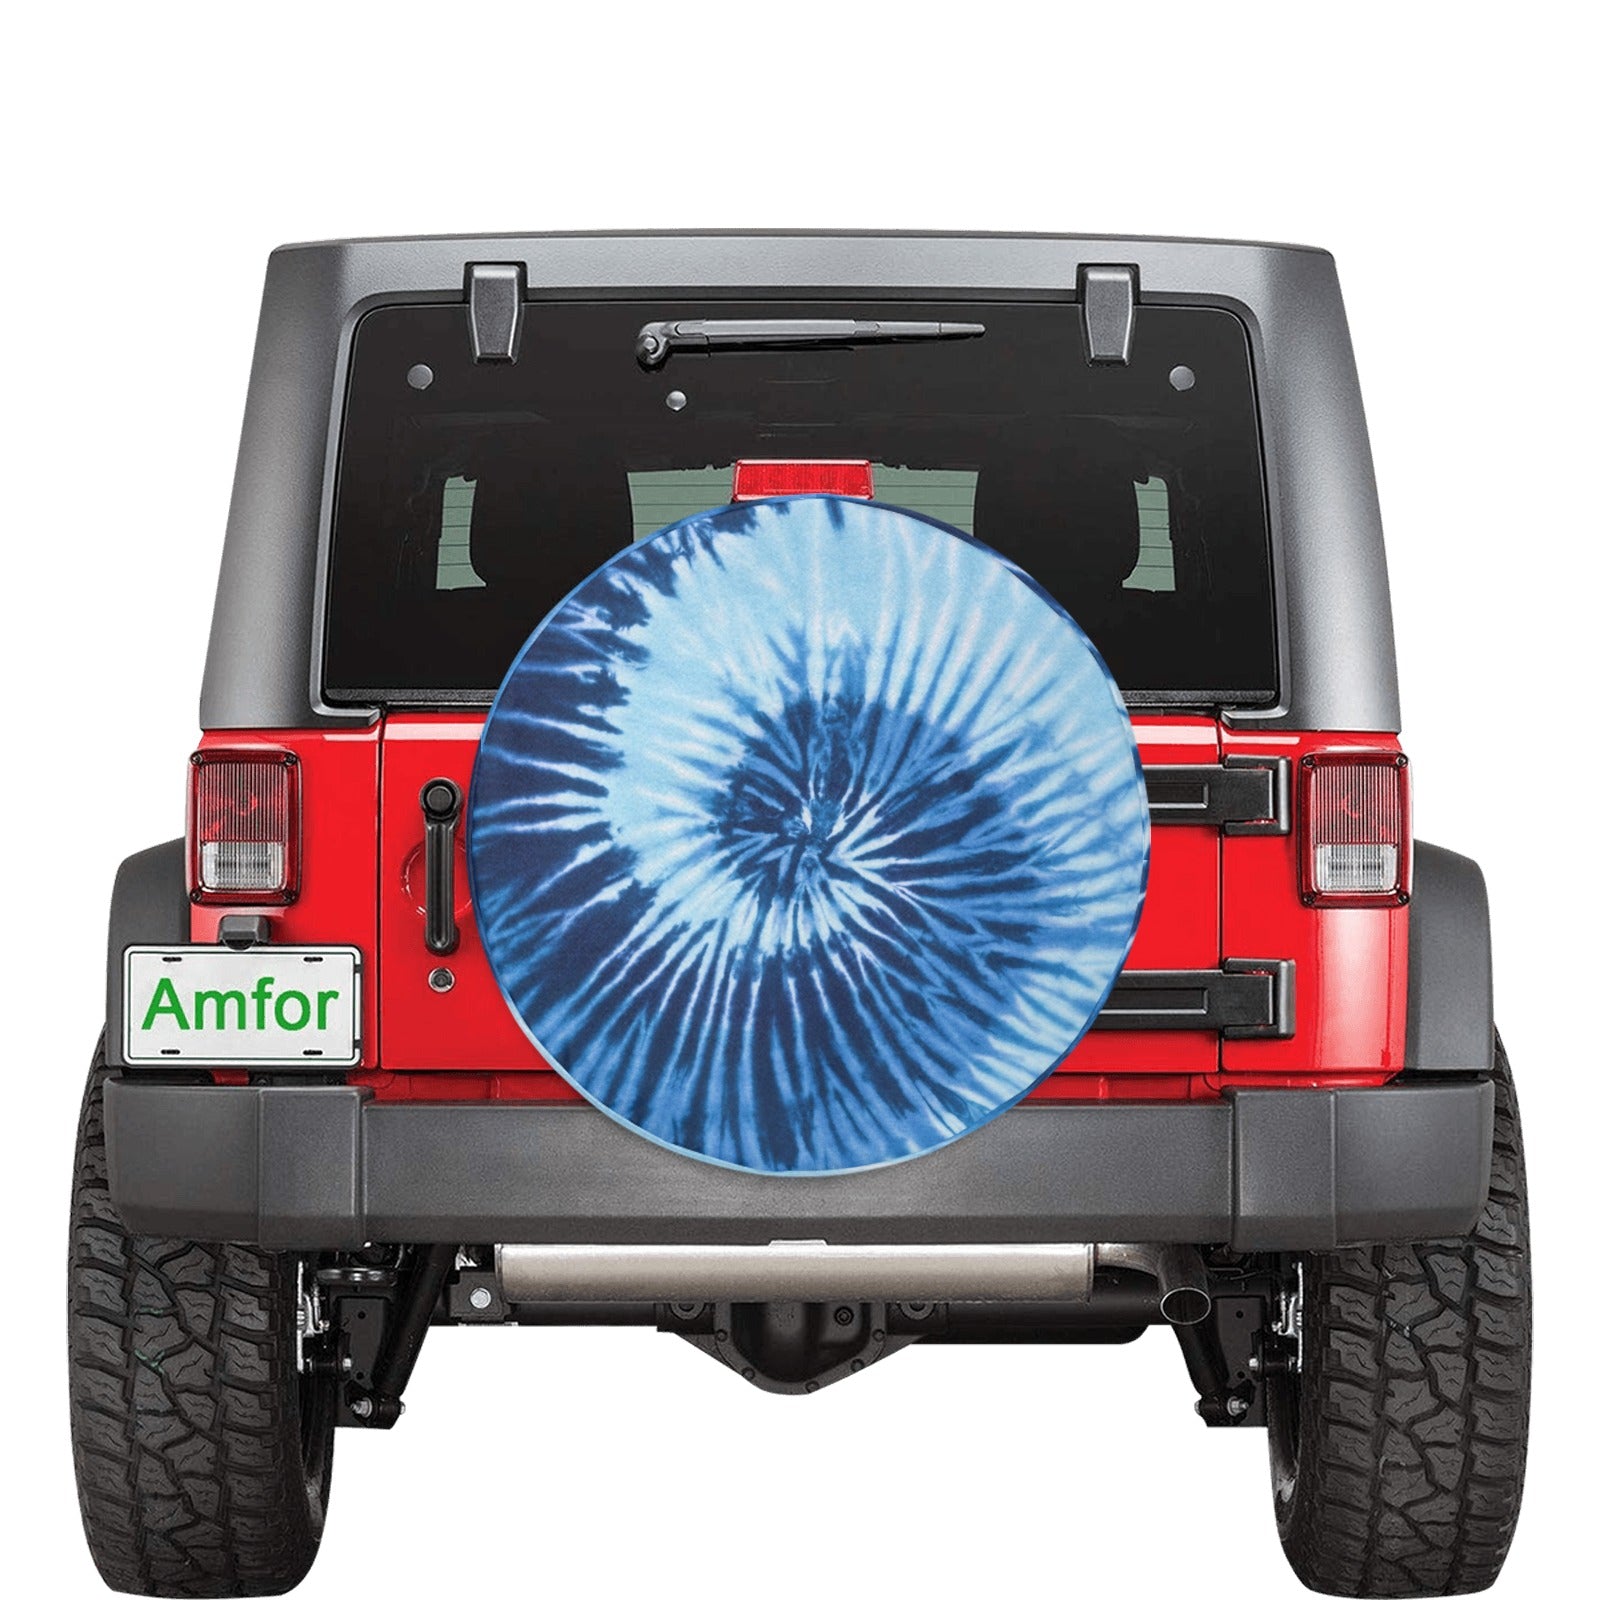 Tie Dye Spare Tire Cover With Backup Camera Hole, Blue Unique Back Wheel Tire Cover for Car Men Women RV Trailer Campers Starcove Fashion